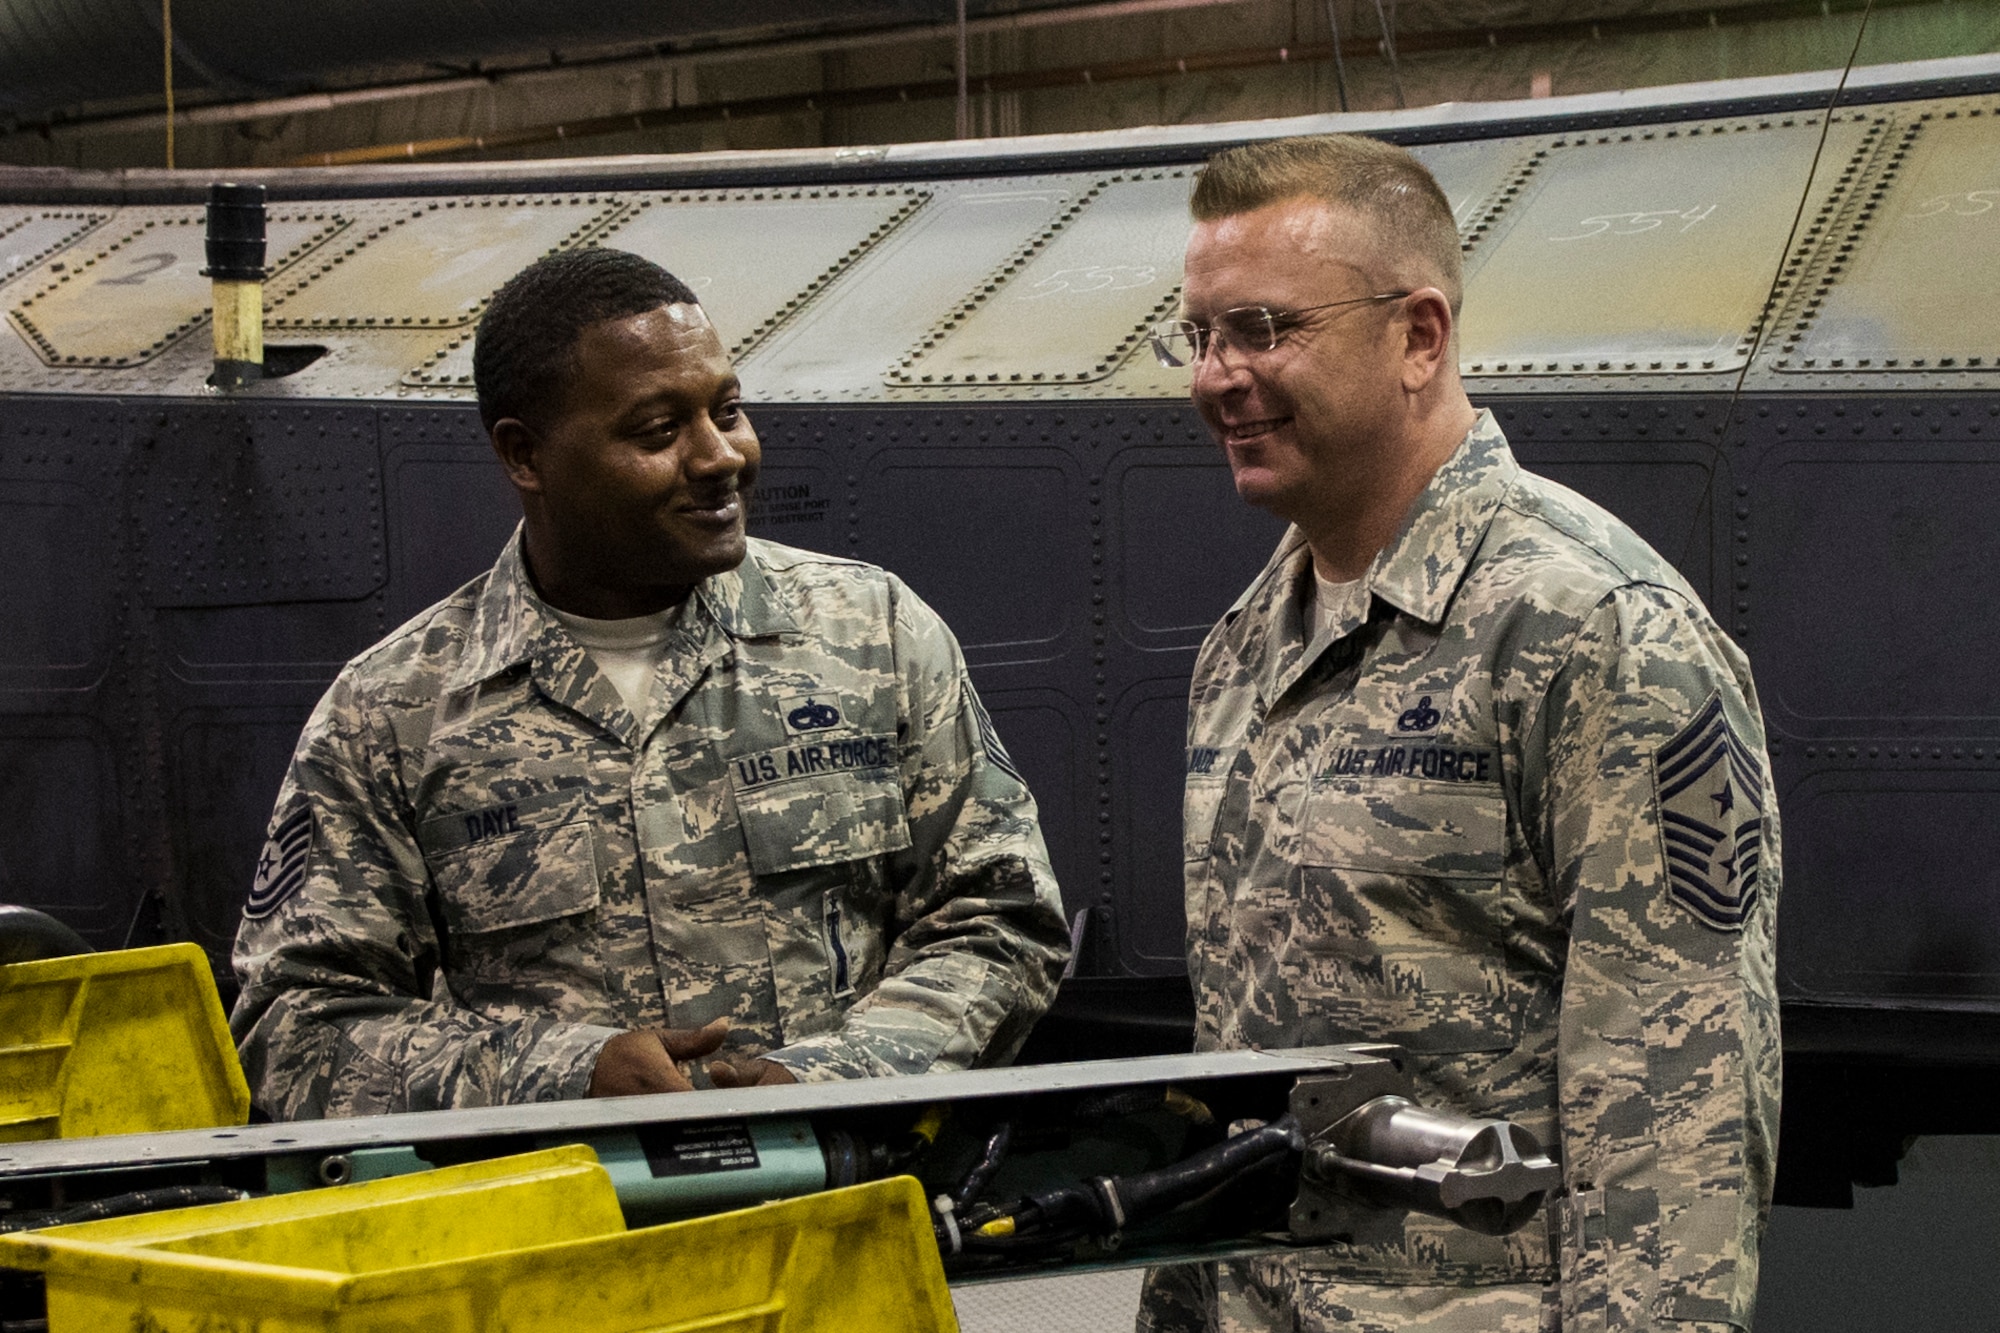 U.S. Air Force Tech. Sgt. Darron Daye, left, 4th Equipment Maintenance Squadron armament maintenance floor supervisor, describes maintenance operations to Chief Master Sgt. David Wade, 9th Air Force command chief, Aug. 14, 2017, at Seymour Johnson Air Force Base, N.C. Wade visited various 4th Maintenance Group flights and spoke with Airmen about their mission to support dominant Strike Eagle airpower. (U.S. Air Force photo by Airman 1st Class Shawna L. Keyes)